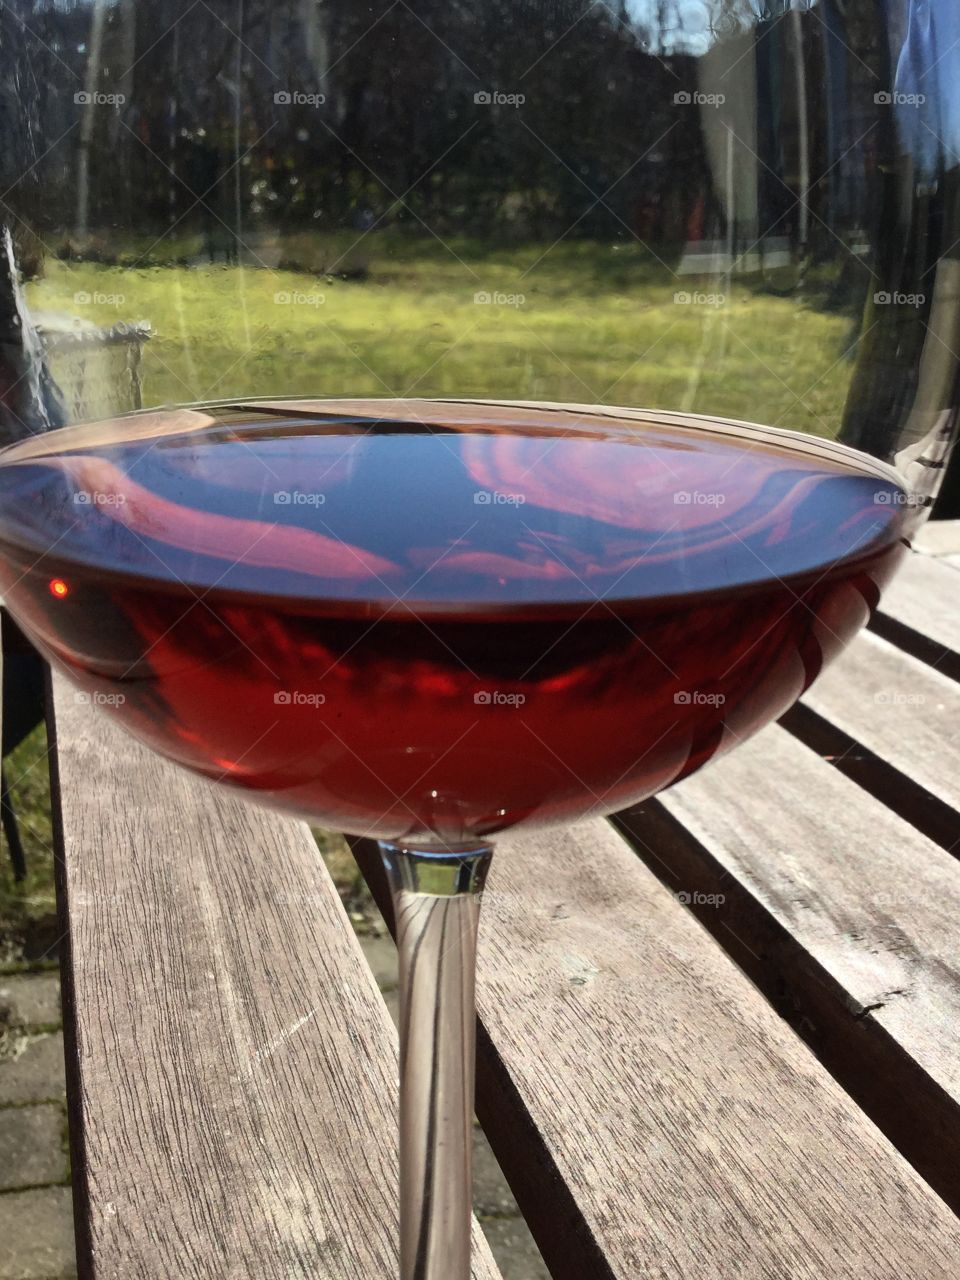 A glas of vine outside in sweden in mars. Early in the year. 